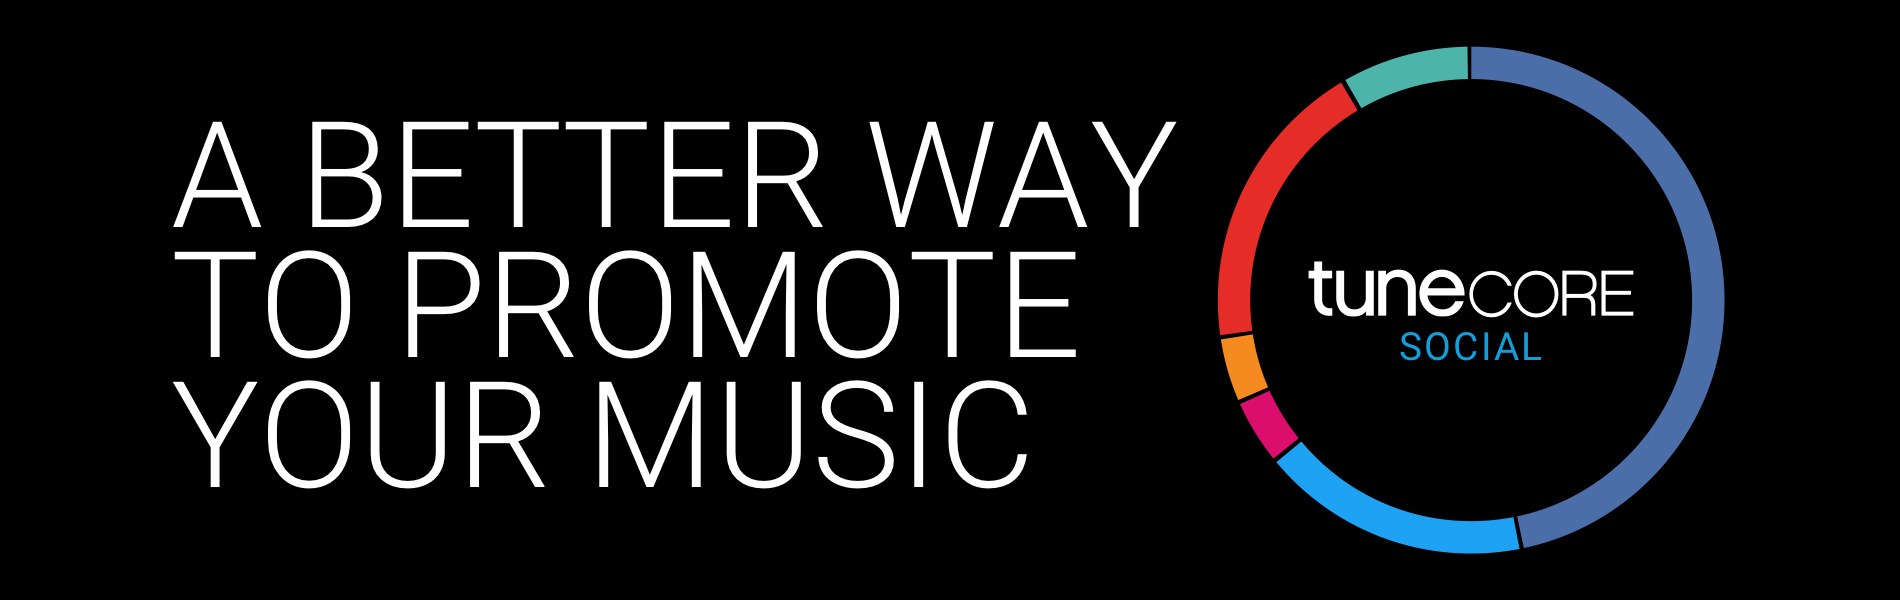 A BETTER WAY TO PROMOTE YOUR MUSIC ON SOCIAL MEDIA